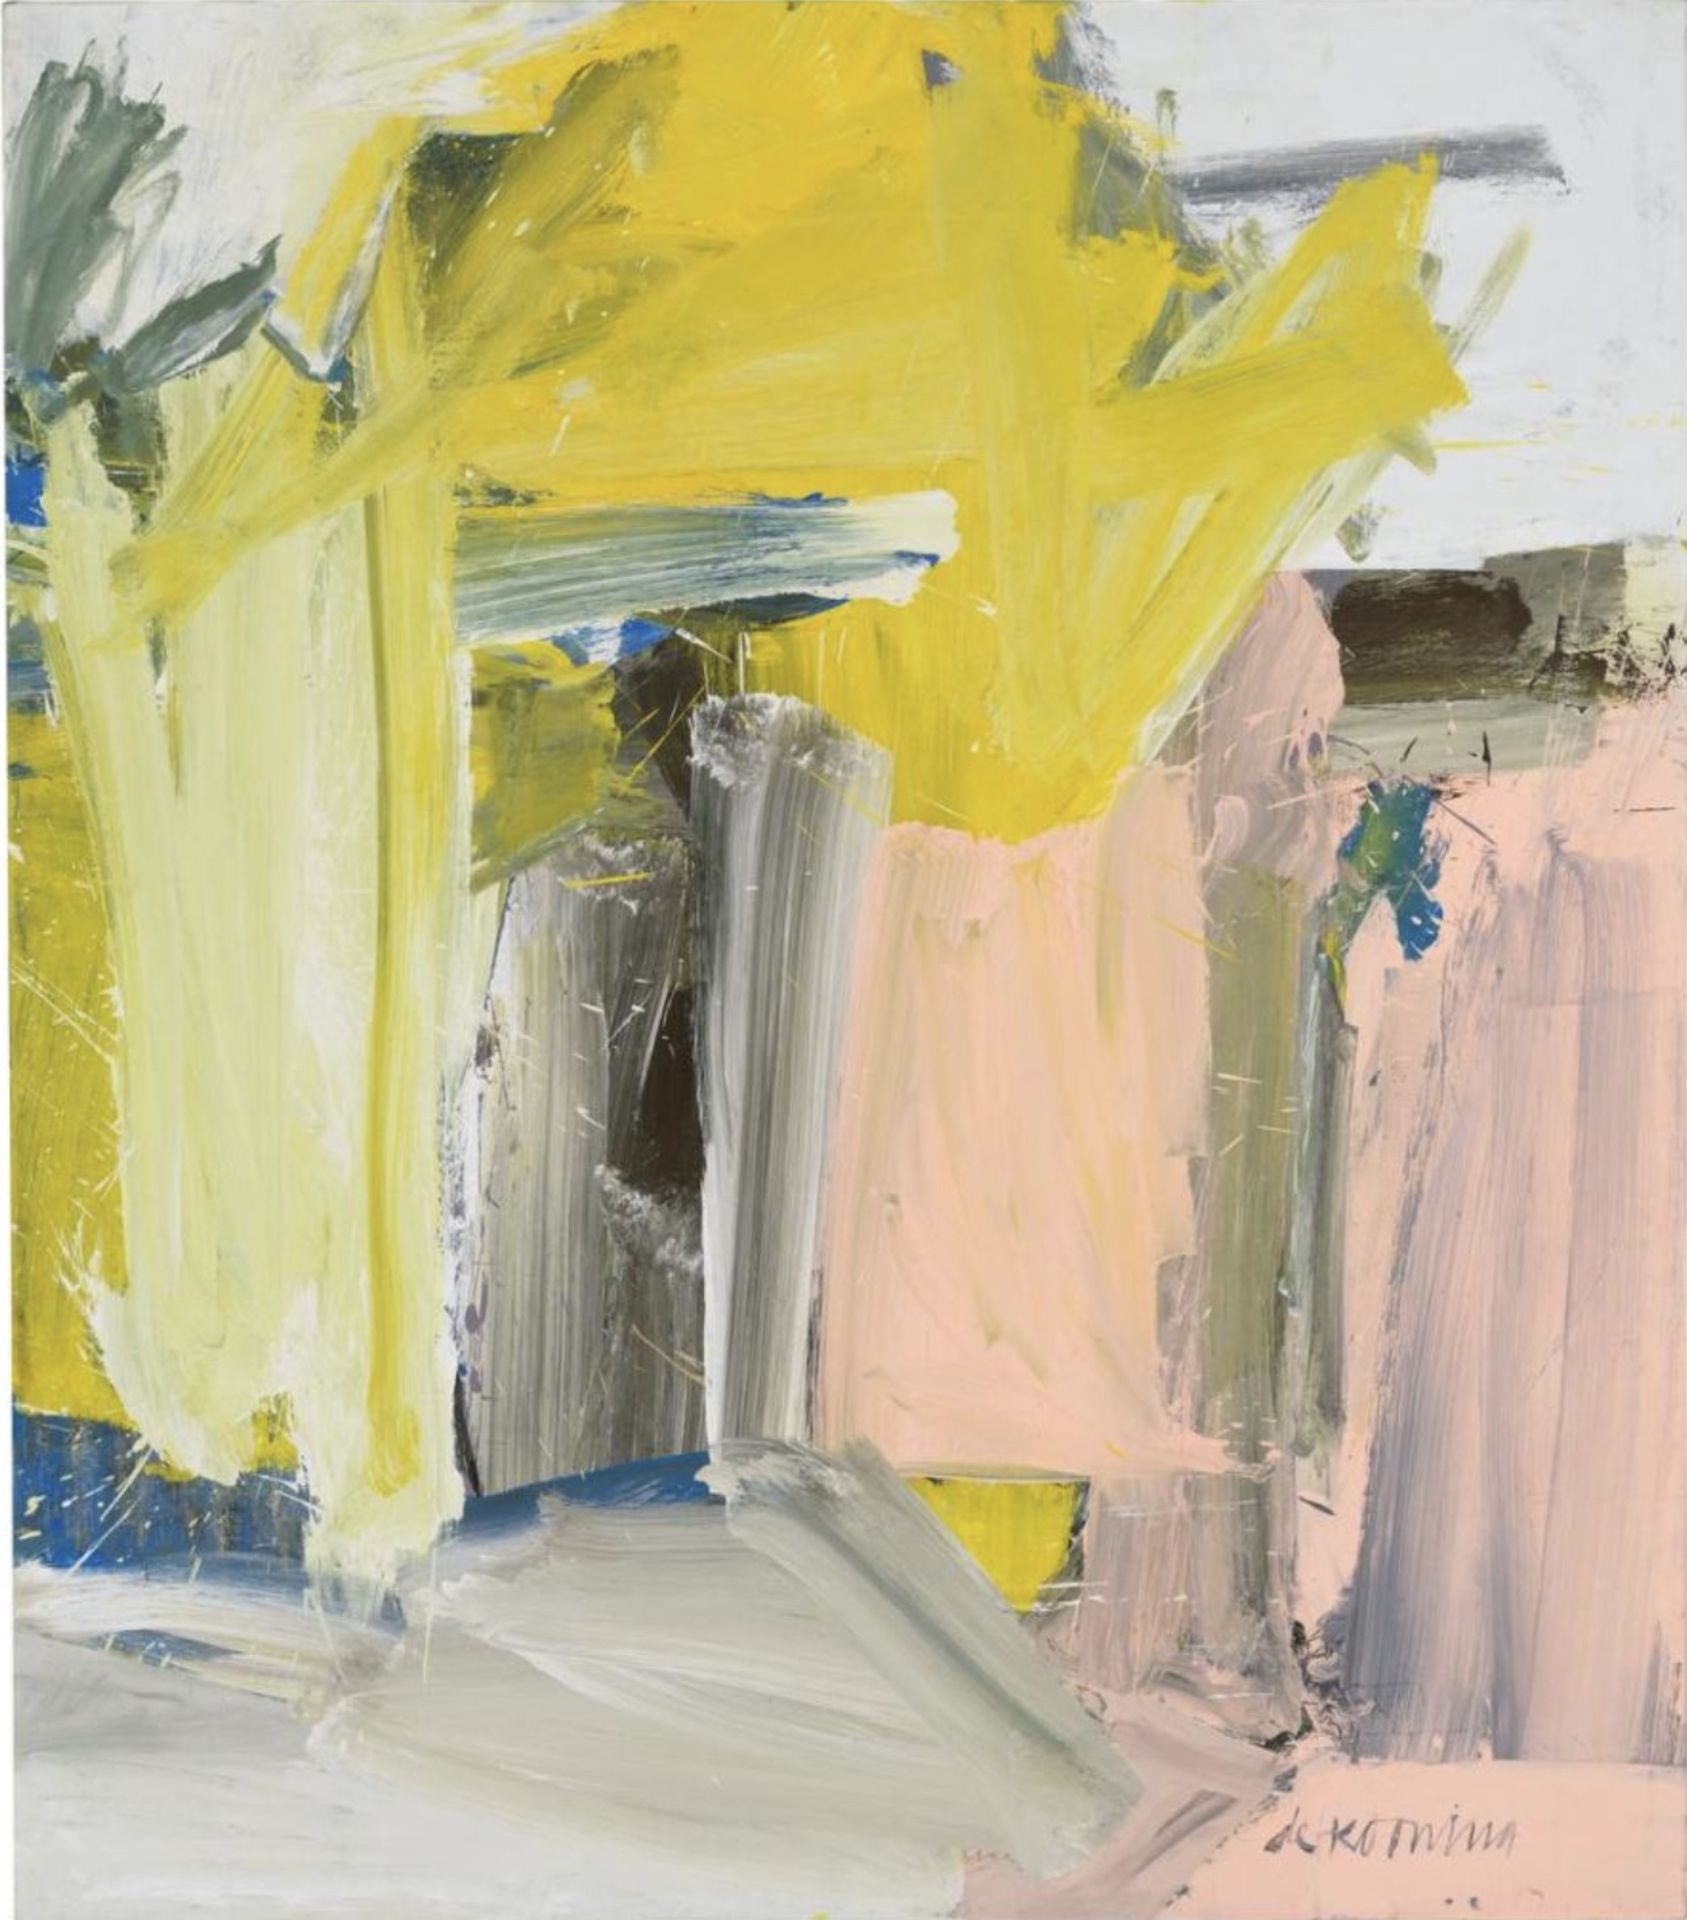 Willem de Kooning "Door to the River, 1960" Offset Lithograph